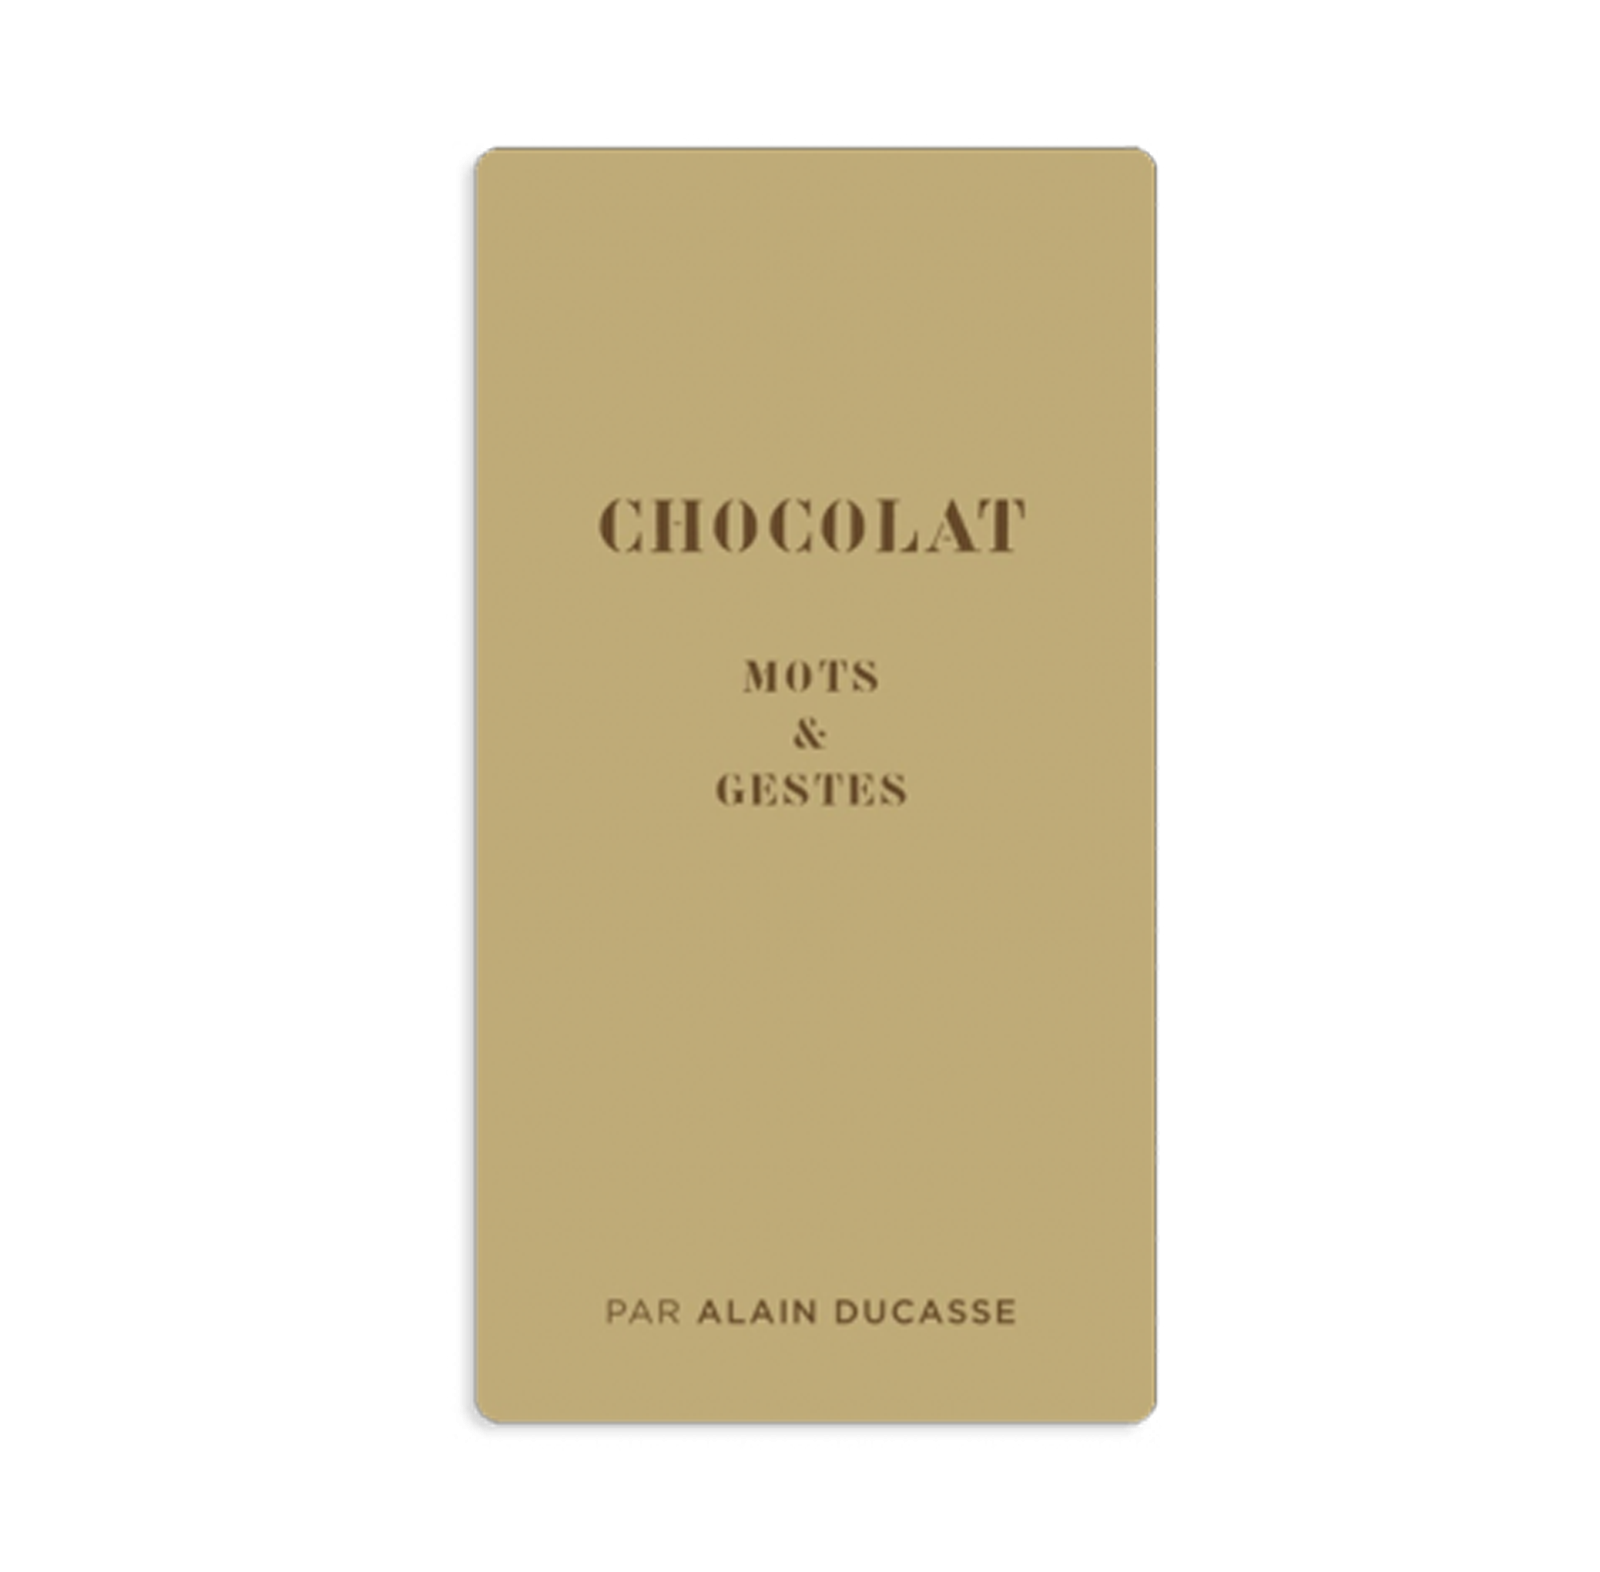 Mots & Gestes by Alain Ducasse - English edition